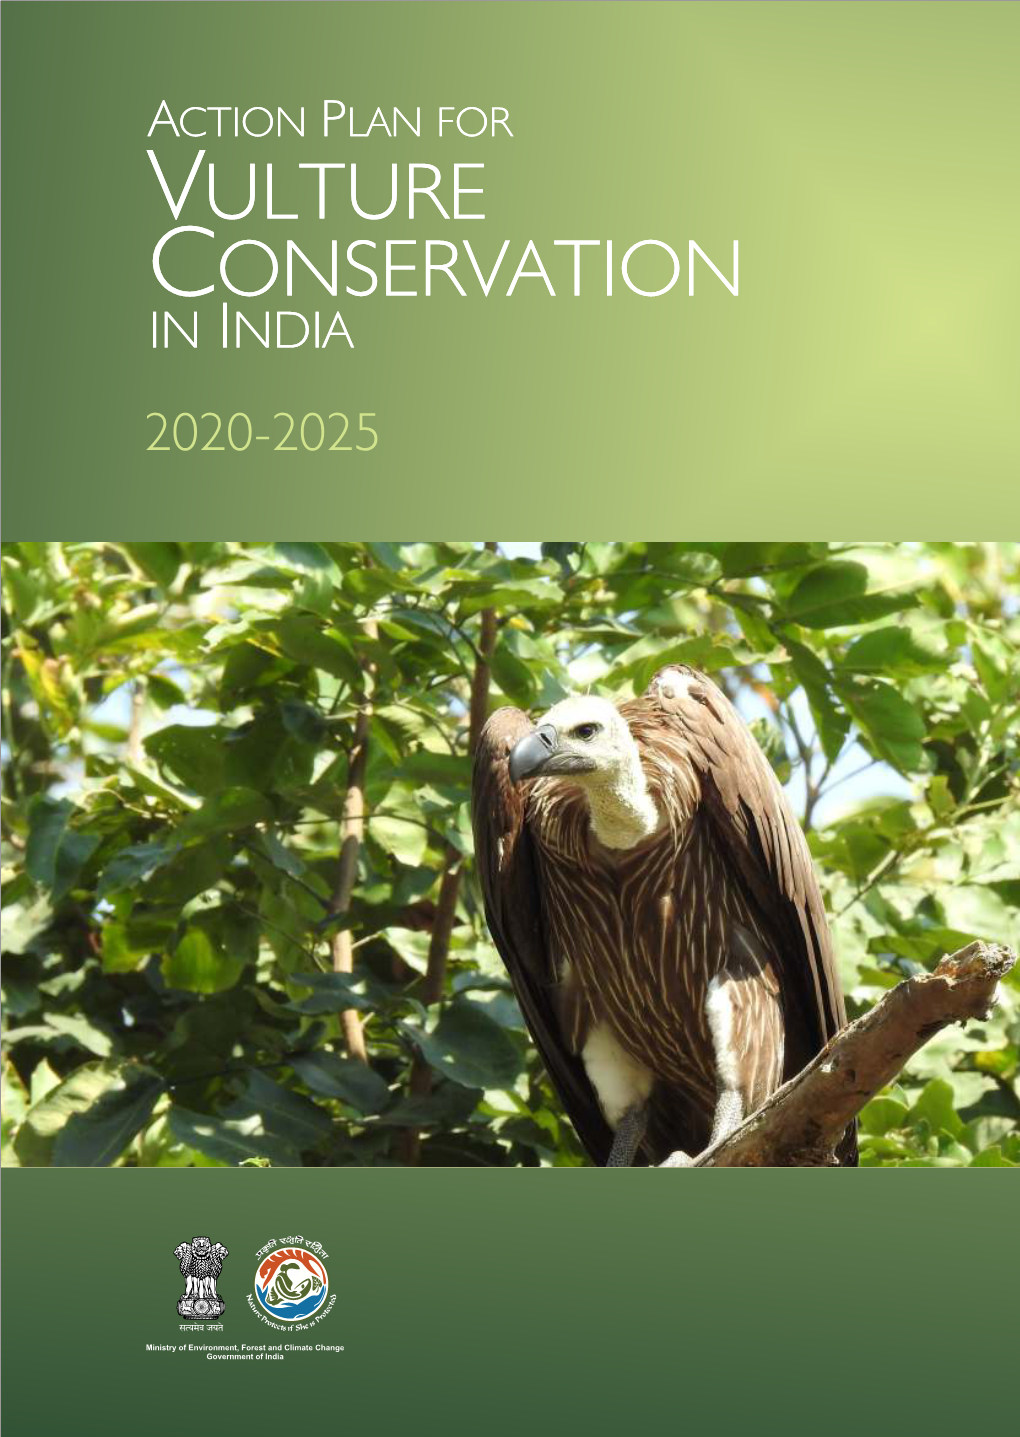 Action Plan for Vulture Conservation in India 2020-2025